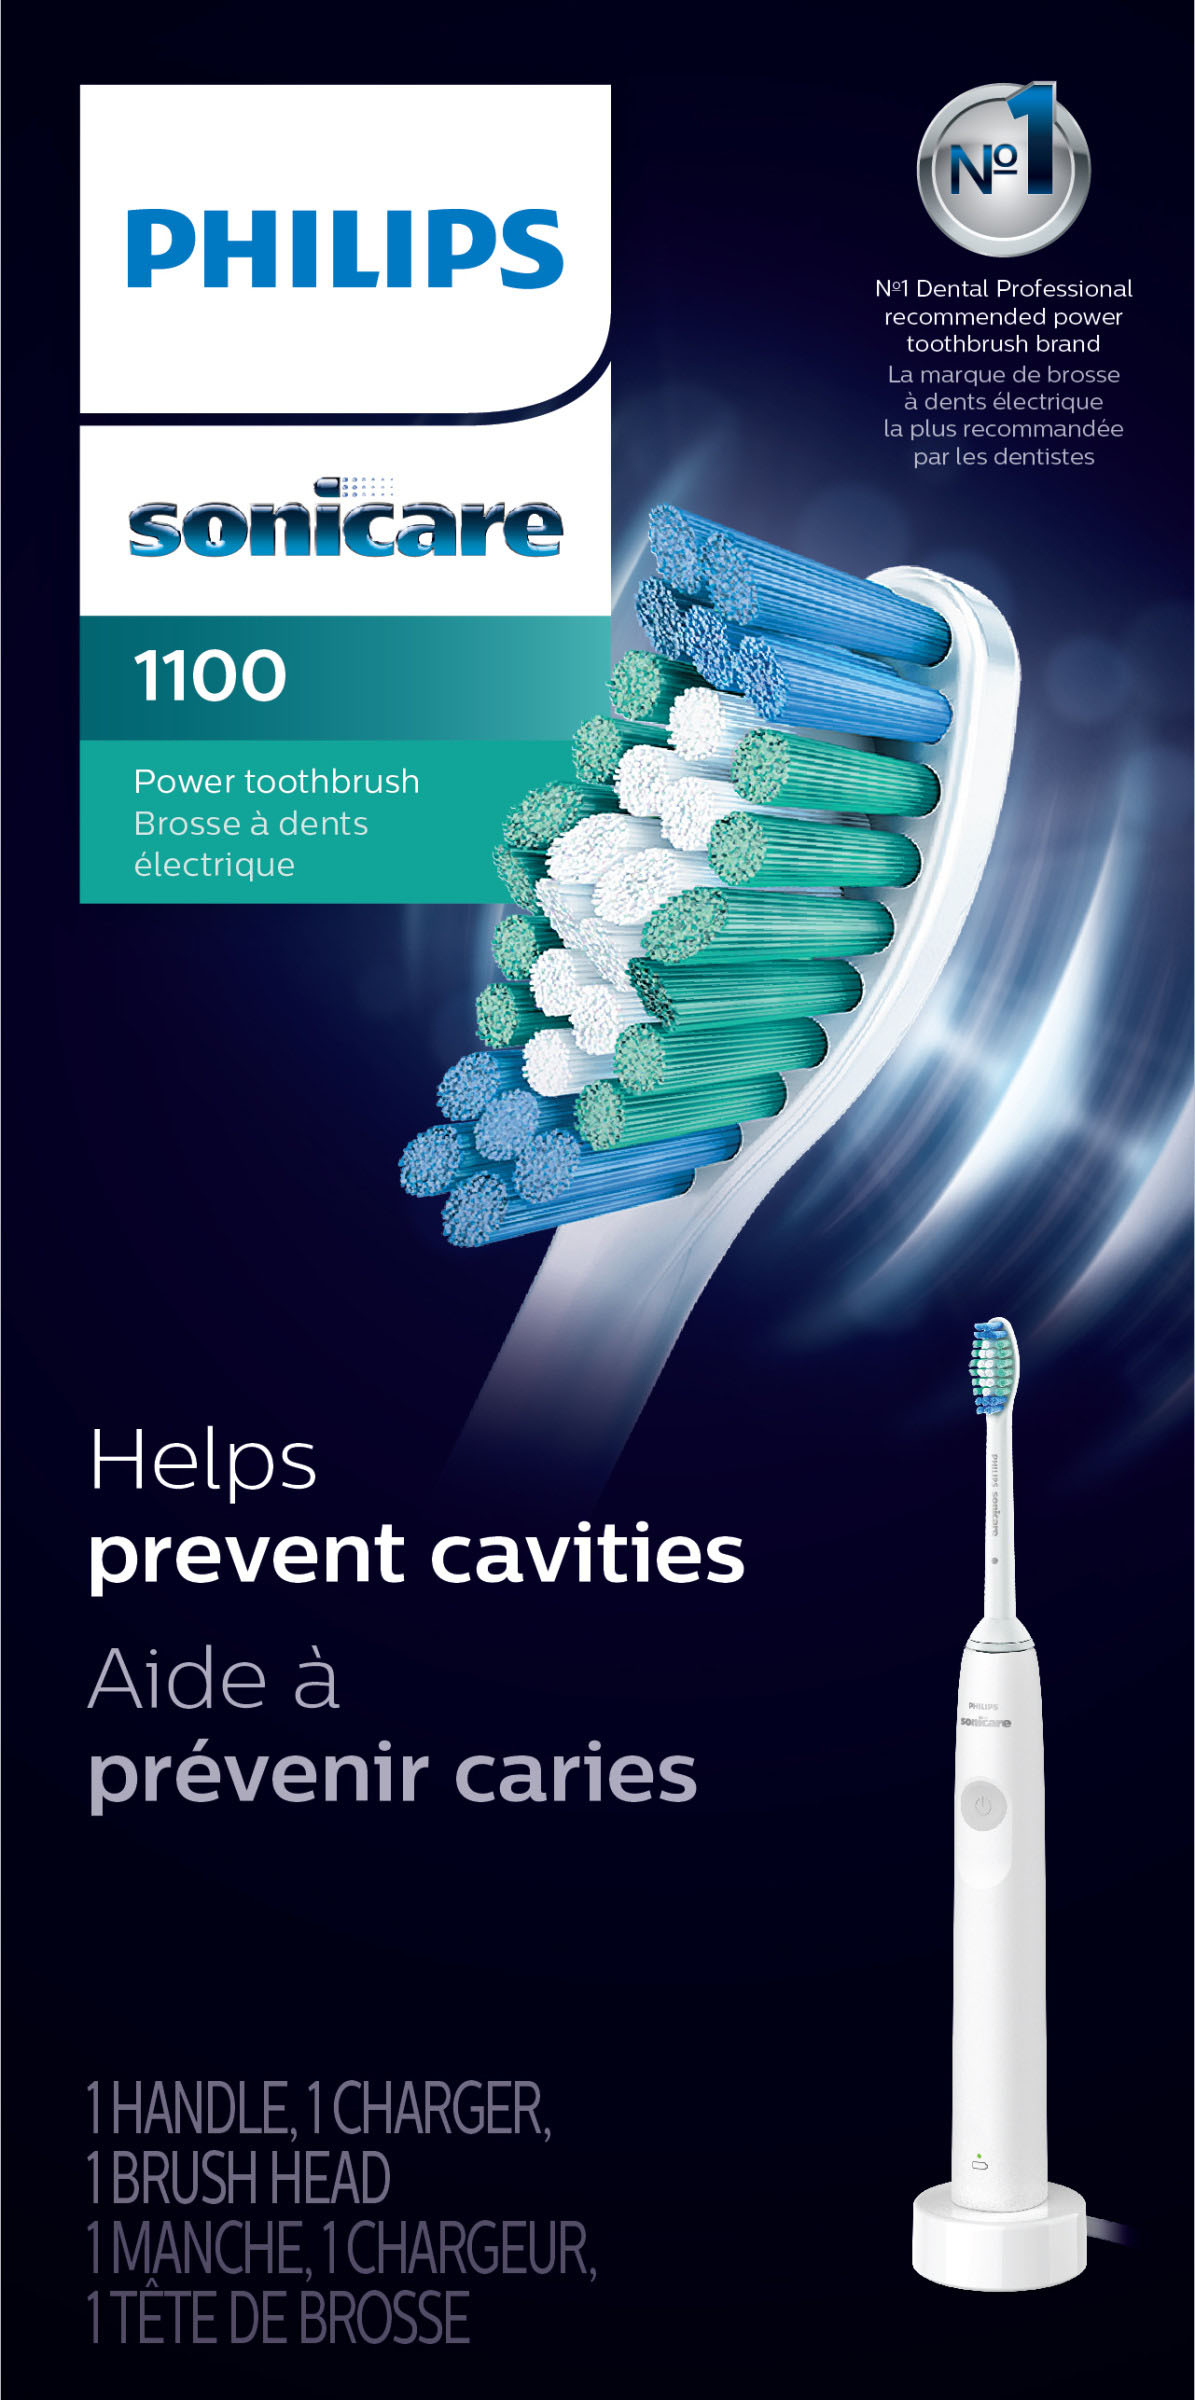 Philips Sonicare 1100 Power Toothbrush, White Grey Buy HX3641/02 Best Electric Toothbrush Rechargeable 